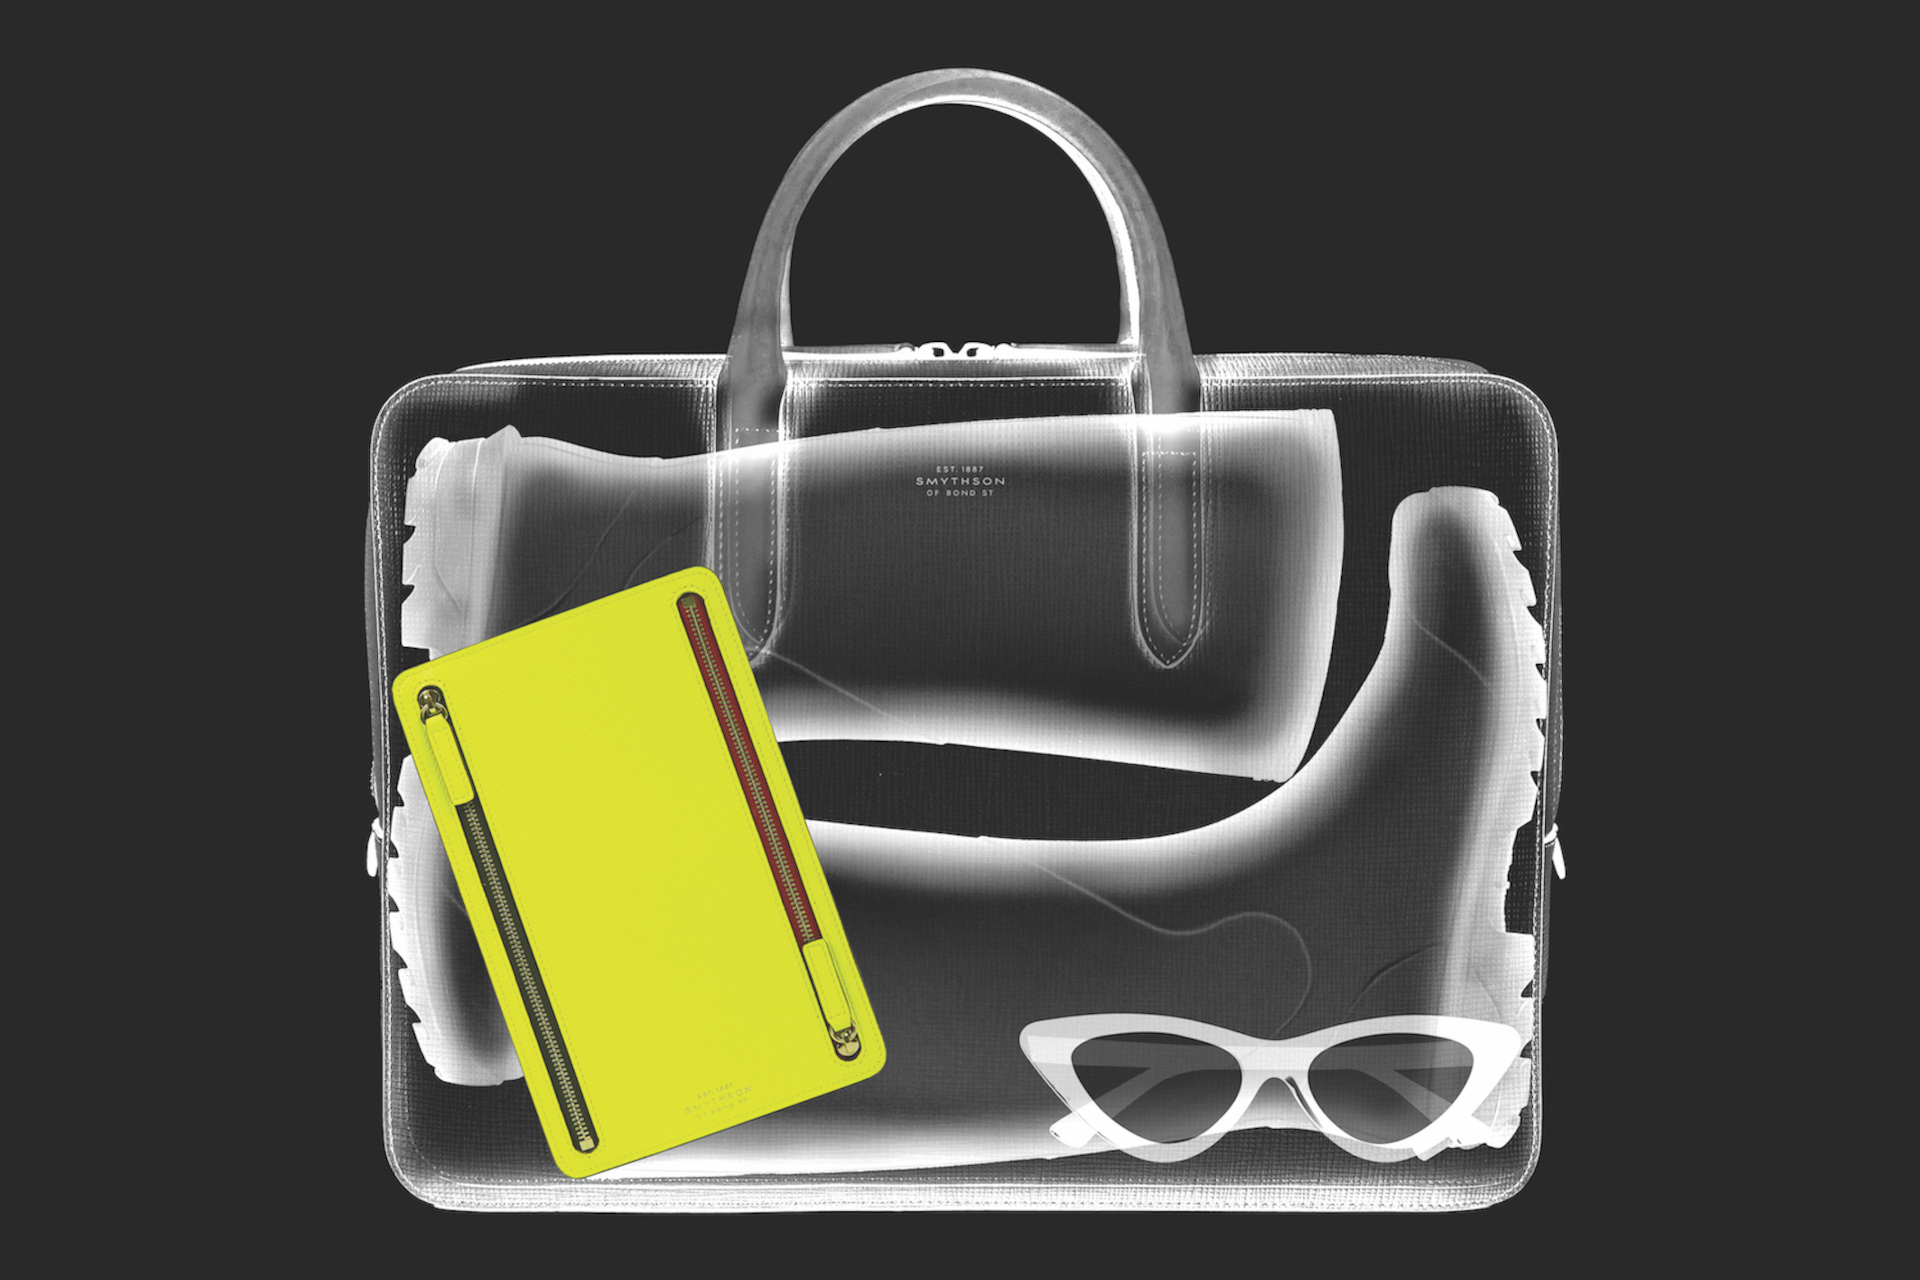 Black xray style image of bag with yellow notebook inside